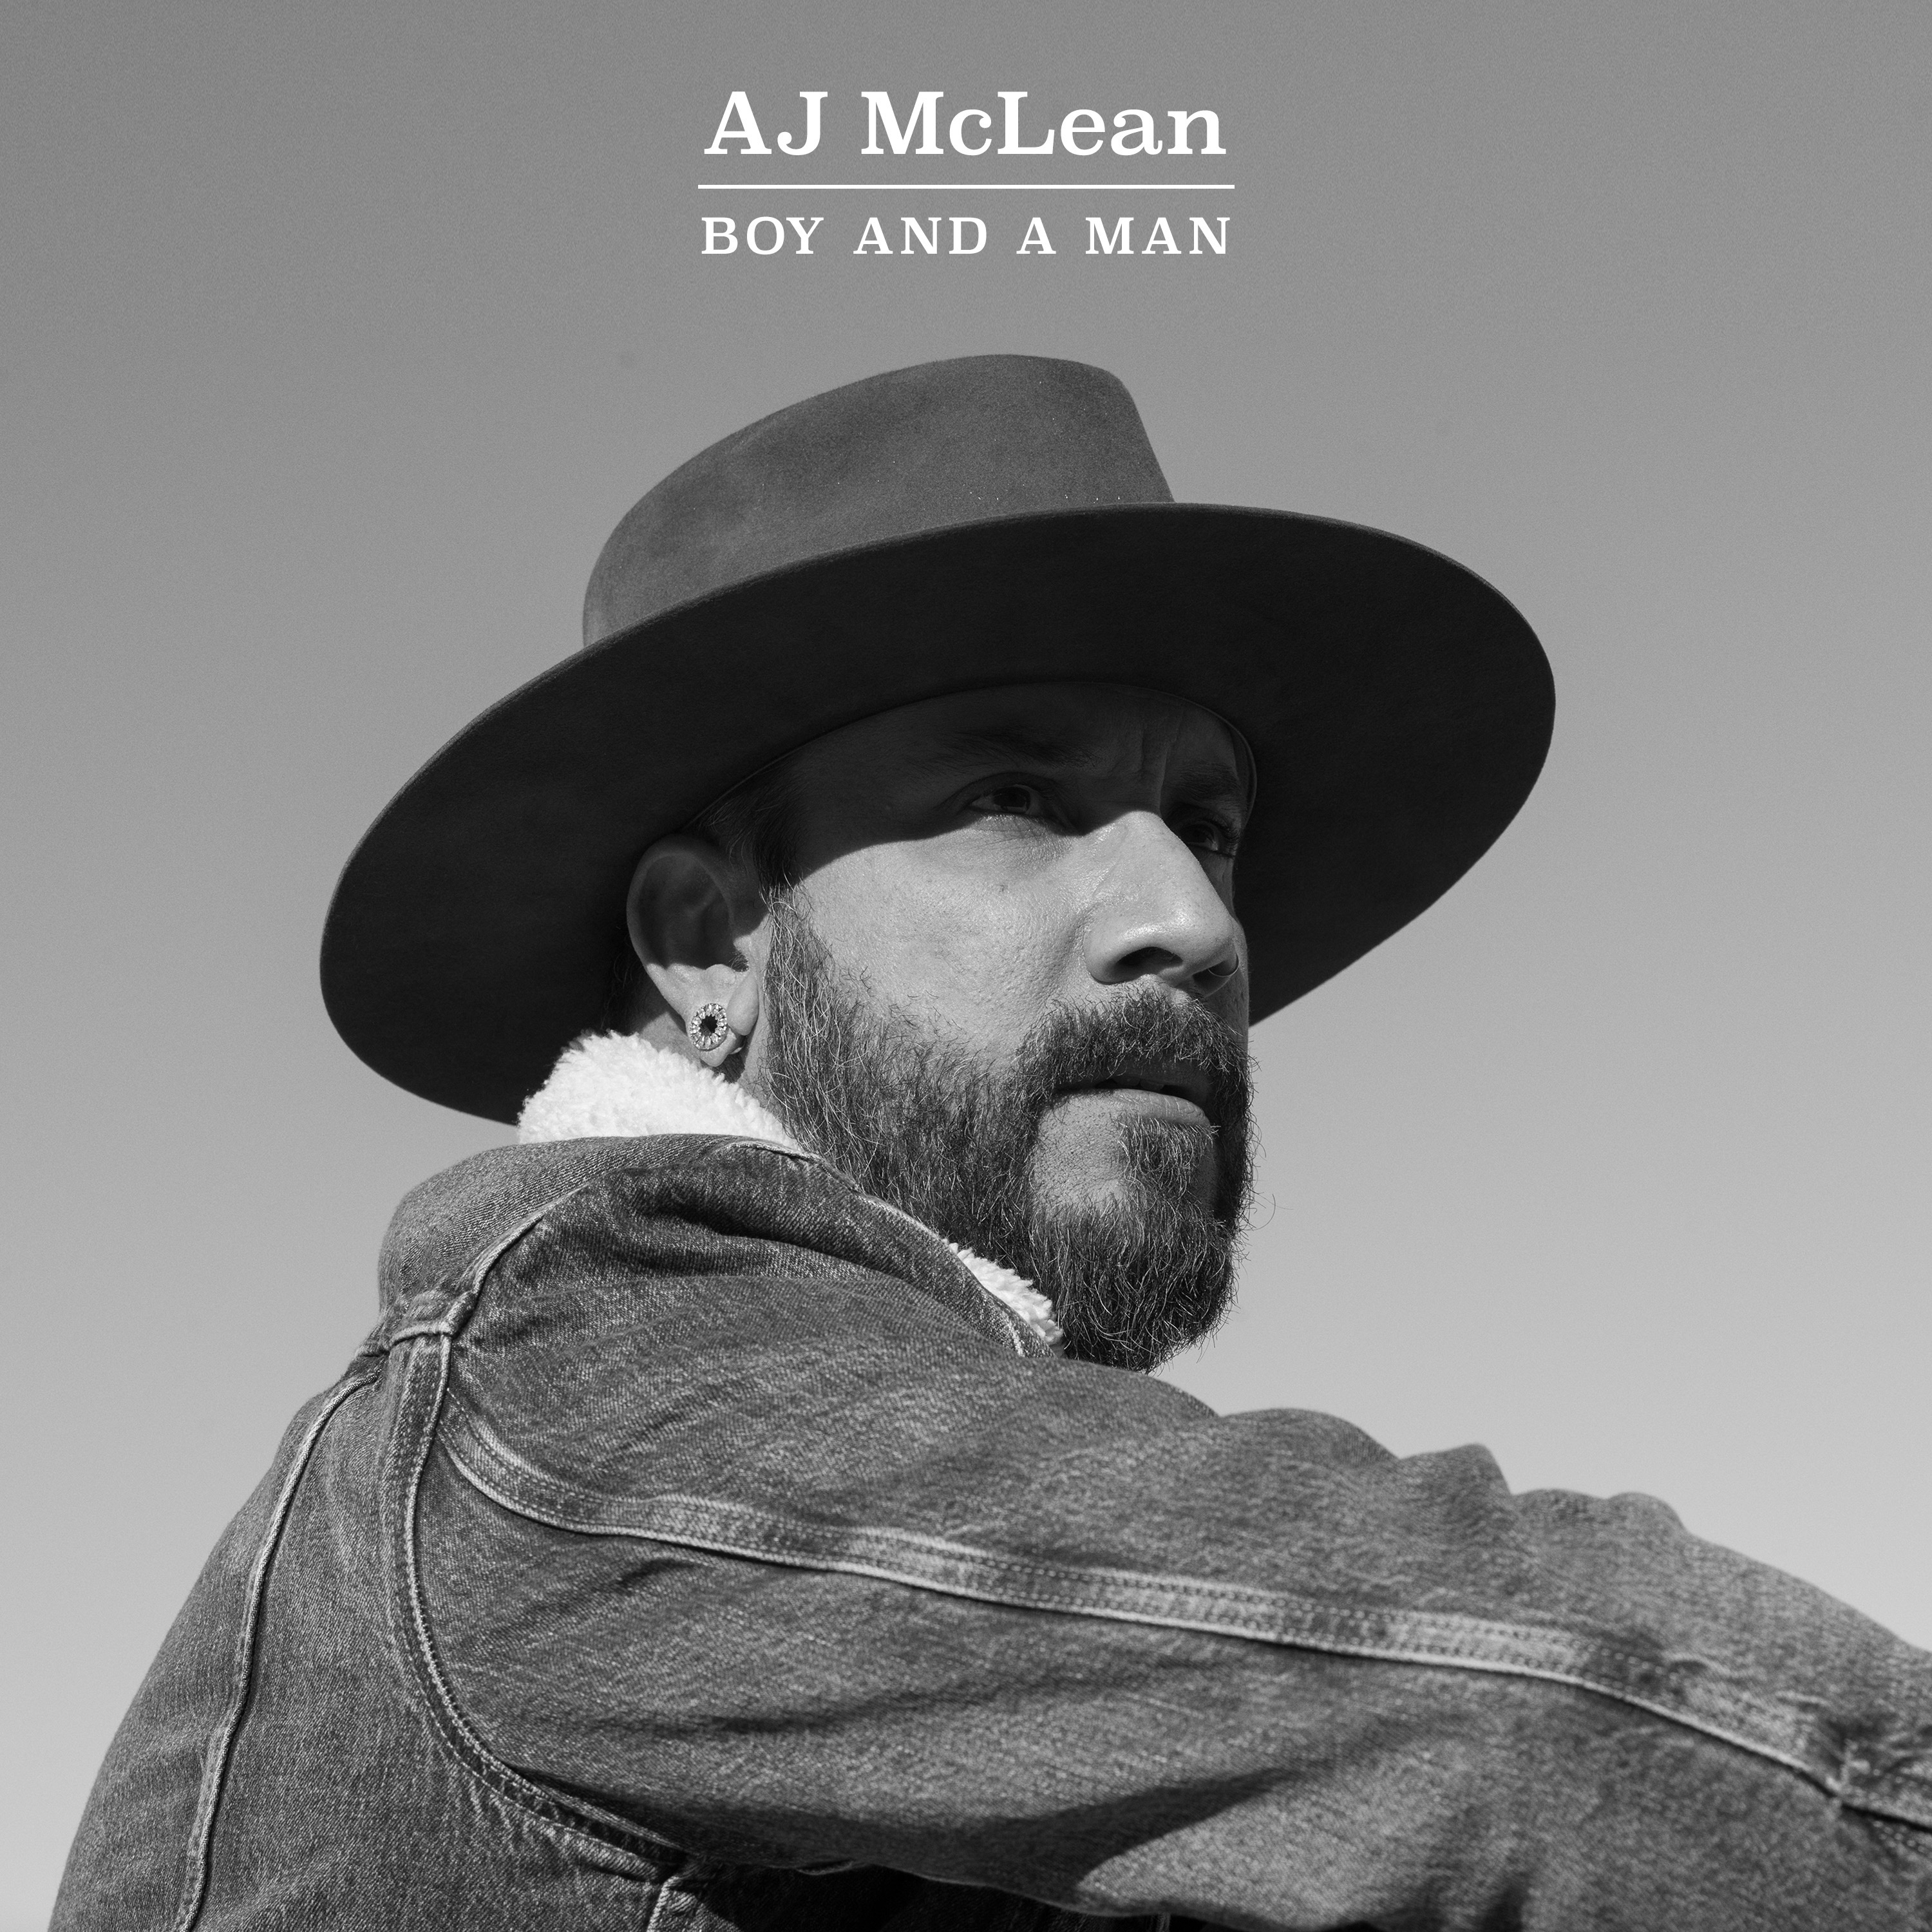 AJ McLean Releases His First Country Single “Boy And A Man” – Listen Now